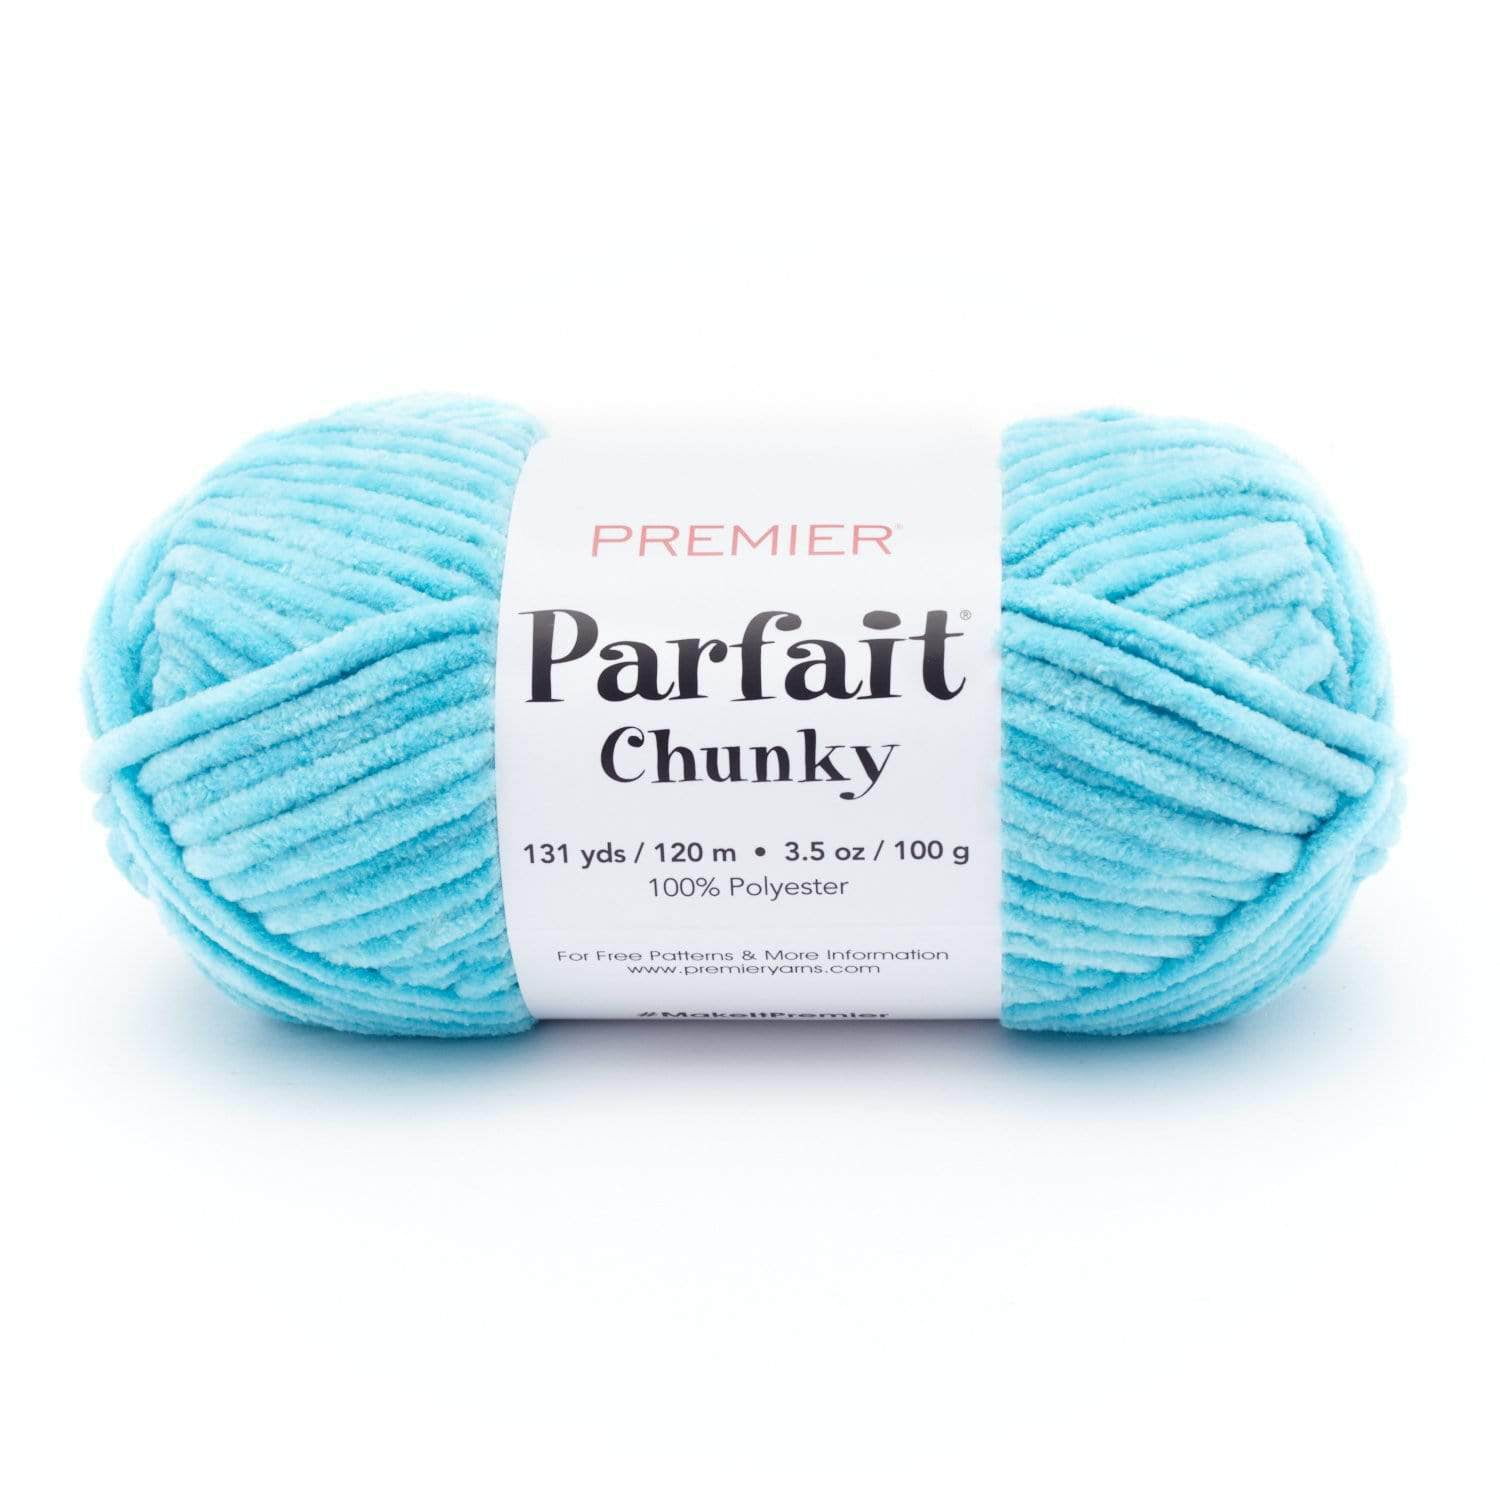 Bobbles and Blankets - This color is giving me ALL of the beachy vibes  today 💙 Premier Parfait Chunky yarn in Seaside